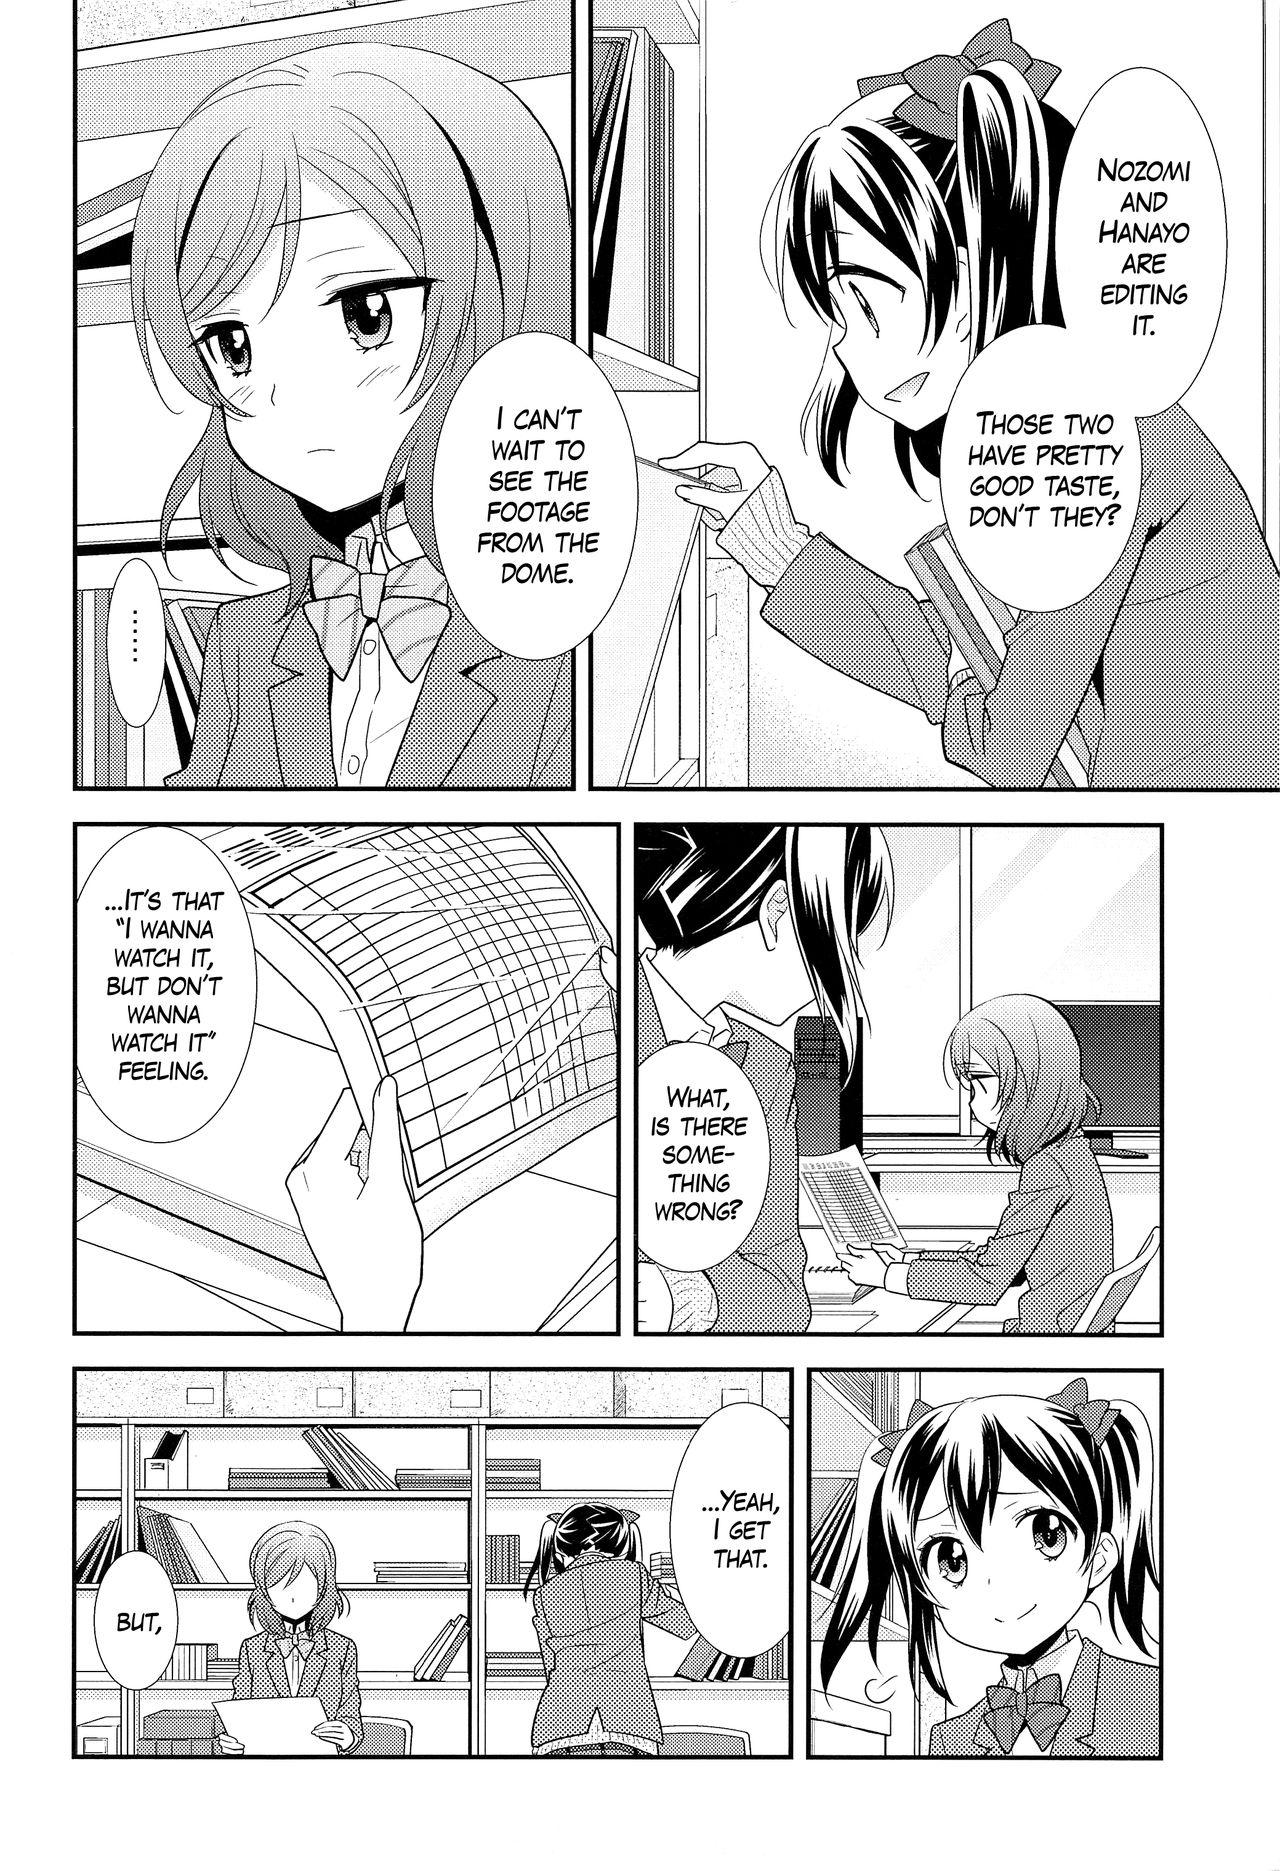 Round Ass Bokura no Te ni wa Ai Shika nai. | There’s Nothing but Love In Our Hands. - Love live 1080p - Page 8